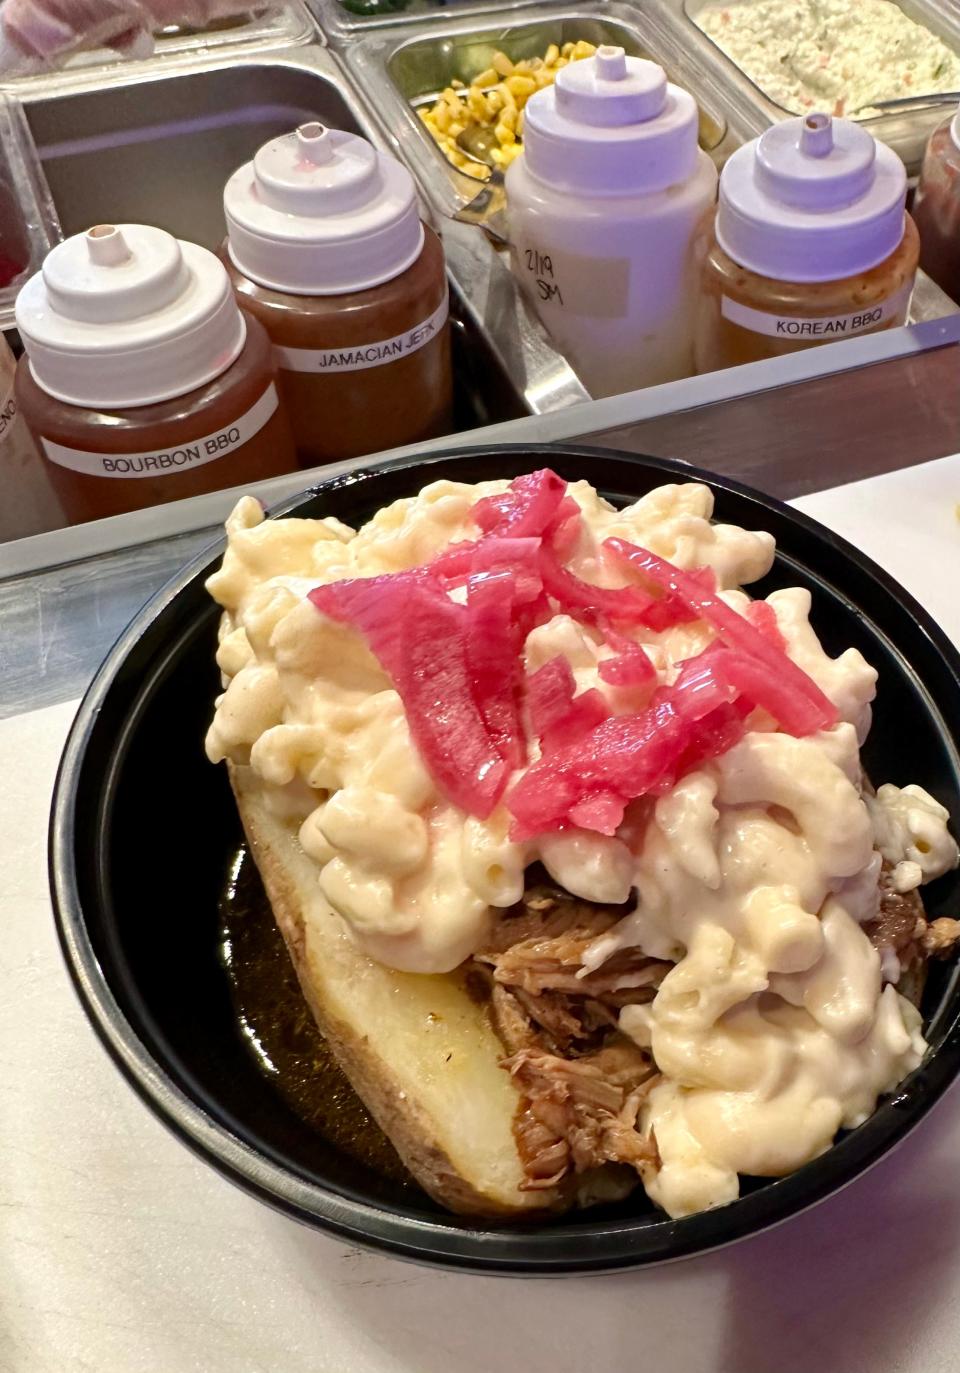 The large barbecue fusion bowl features a baked potato base, tender brisket, and pickled red onions, all ready to be sauced at The Blazing Pig.